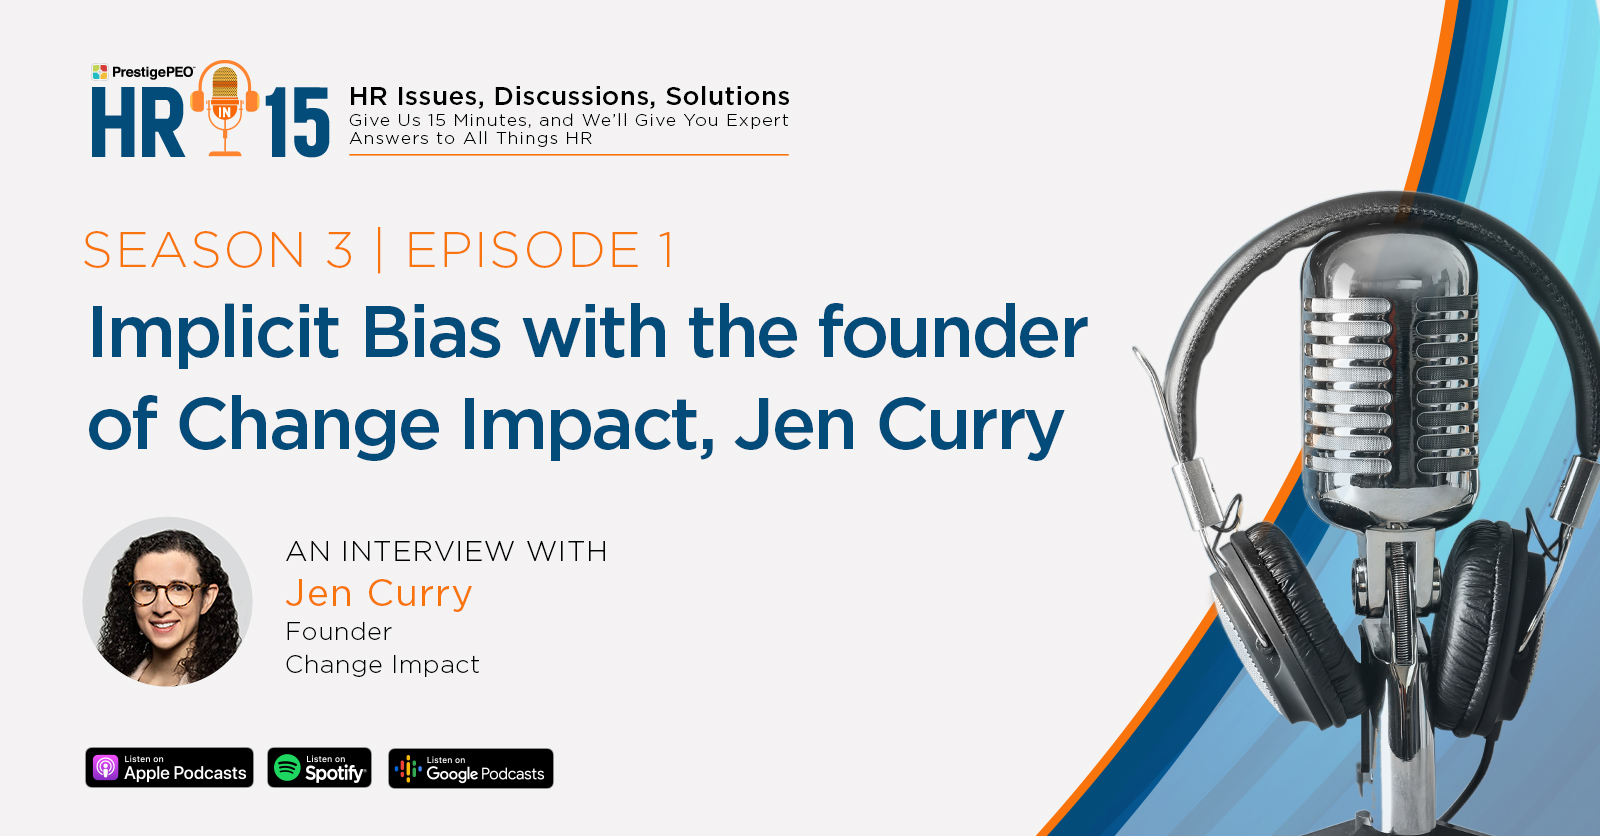 HR-in-15 Interview with Jen Curry: Implicit Bias with the founder of Change Impact